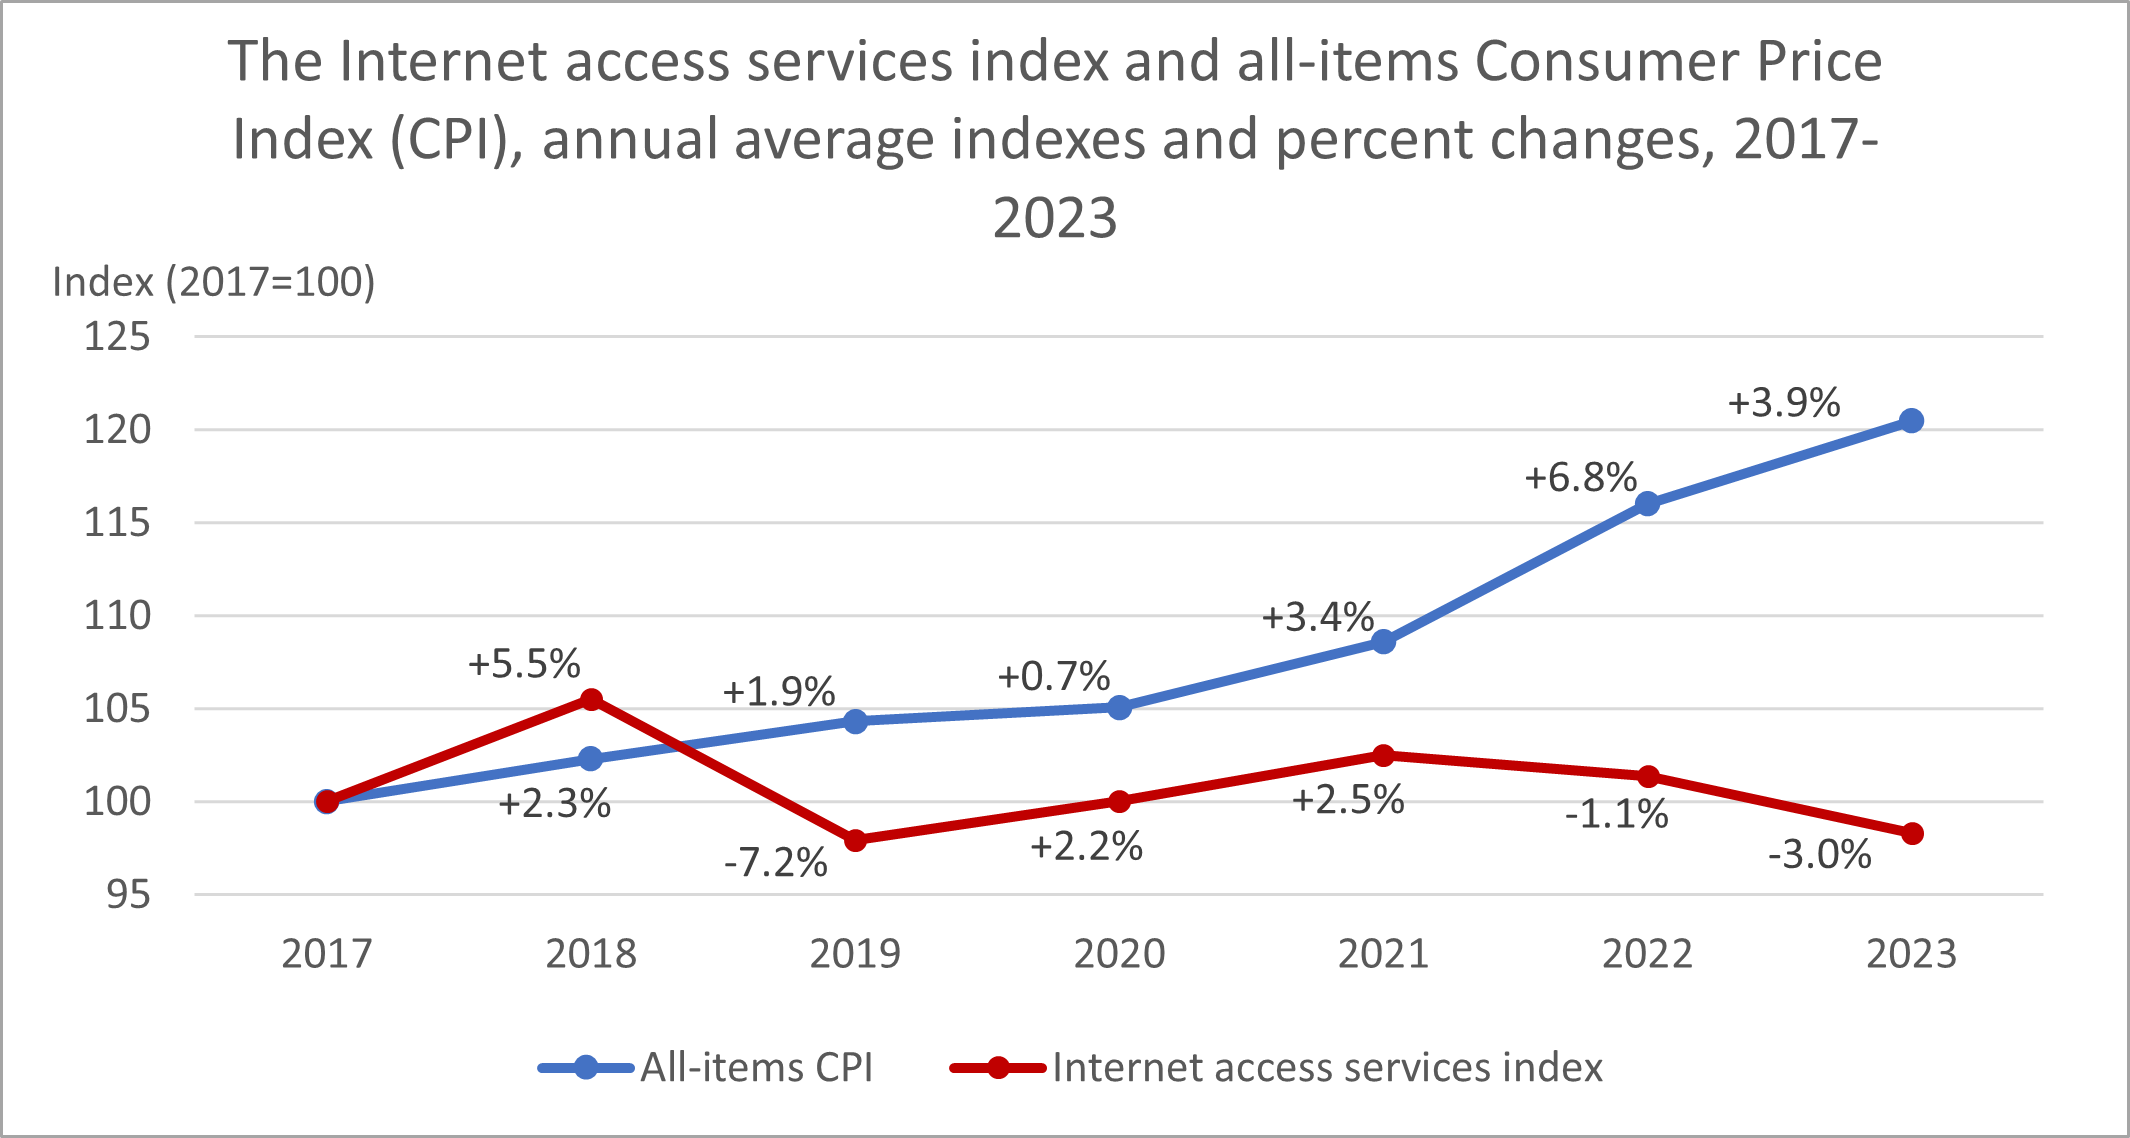 The Internet access services index and all-items Consumer Price Index (CPI), annual average indexes and percent changes, 2017-2023 